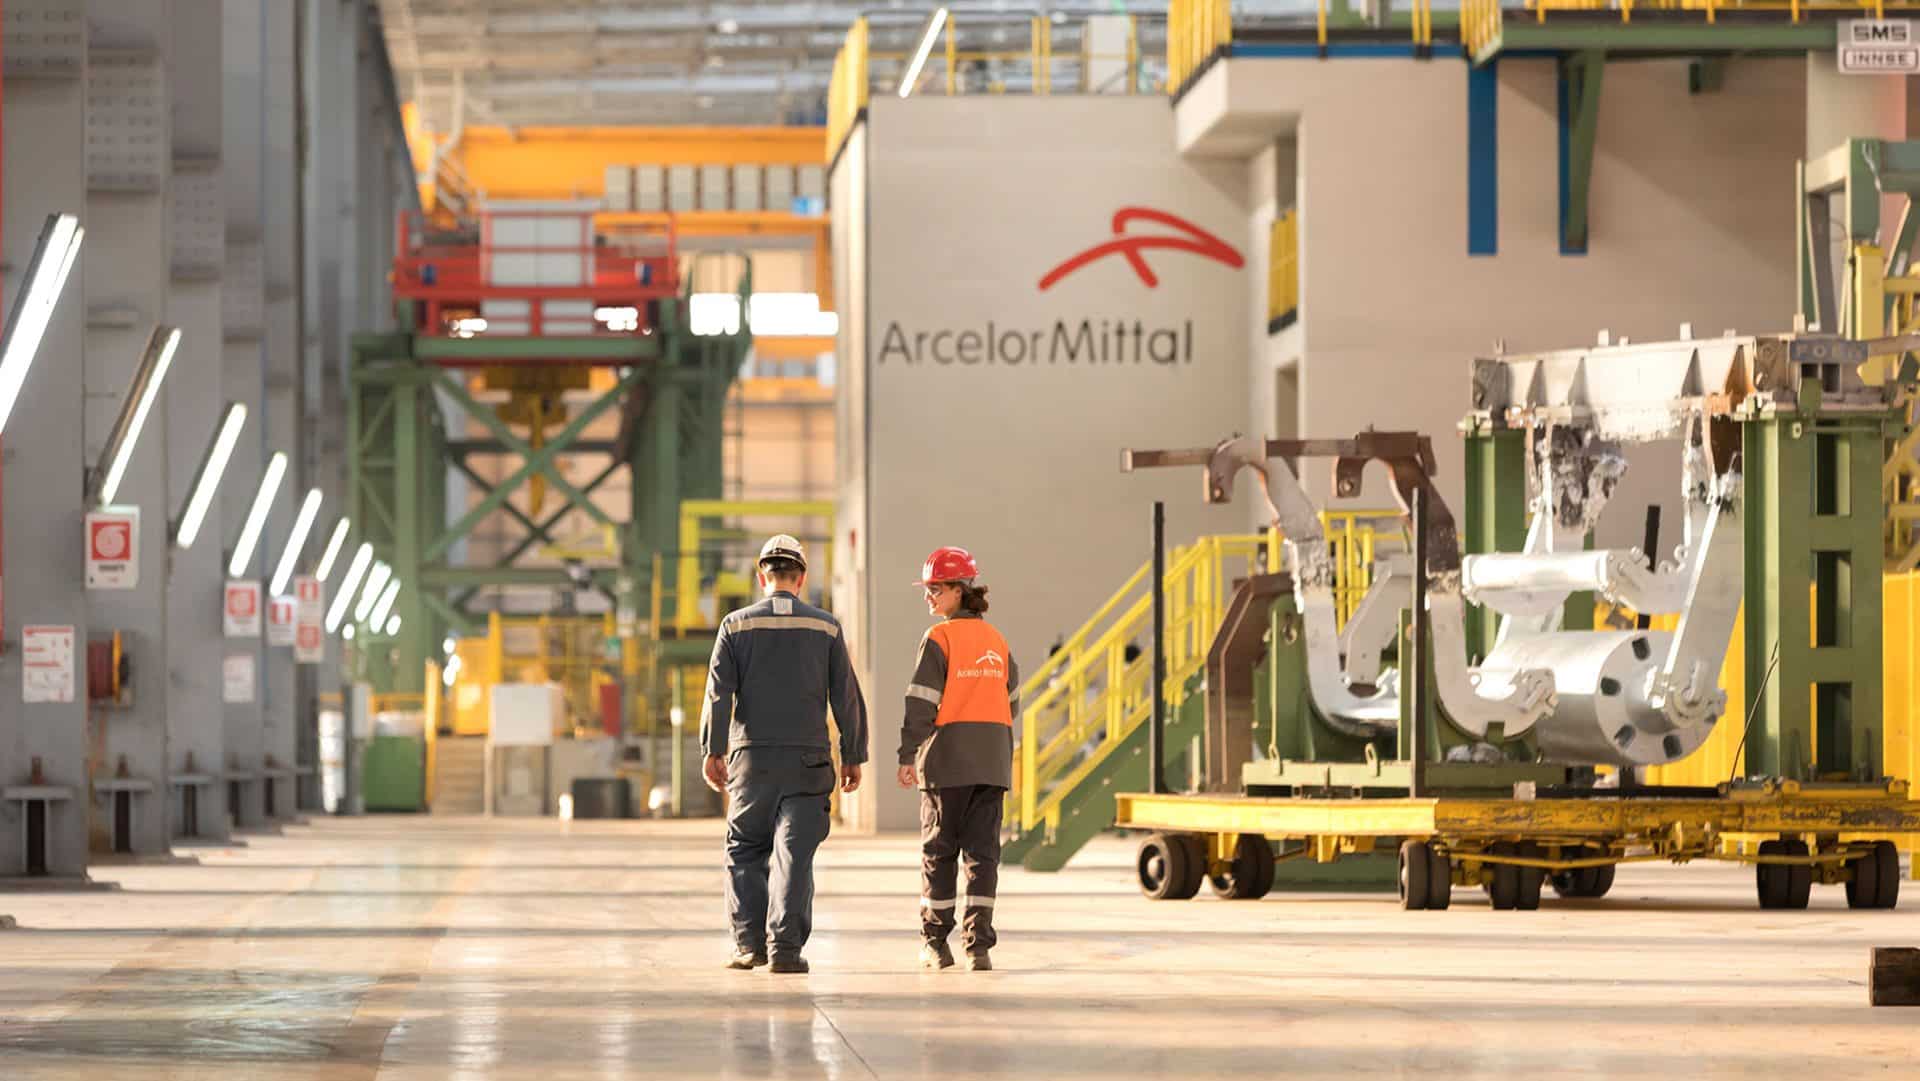 ArcelorMittal plans to invest Rs 1 lakh crore in Gujarat